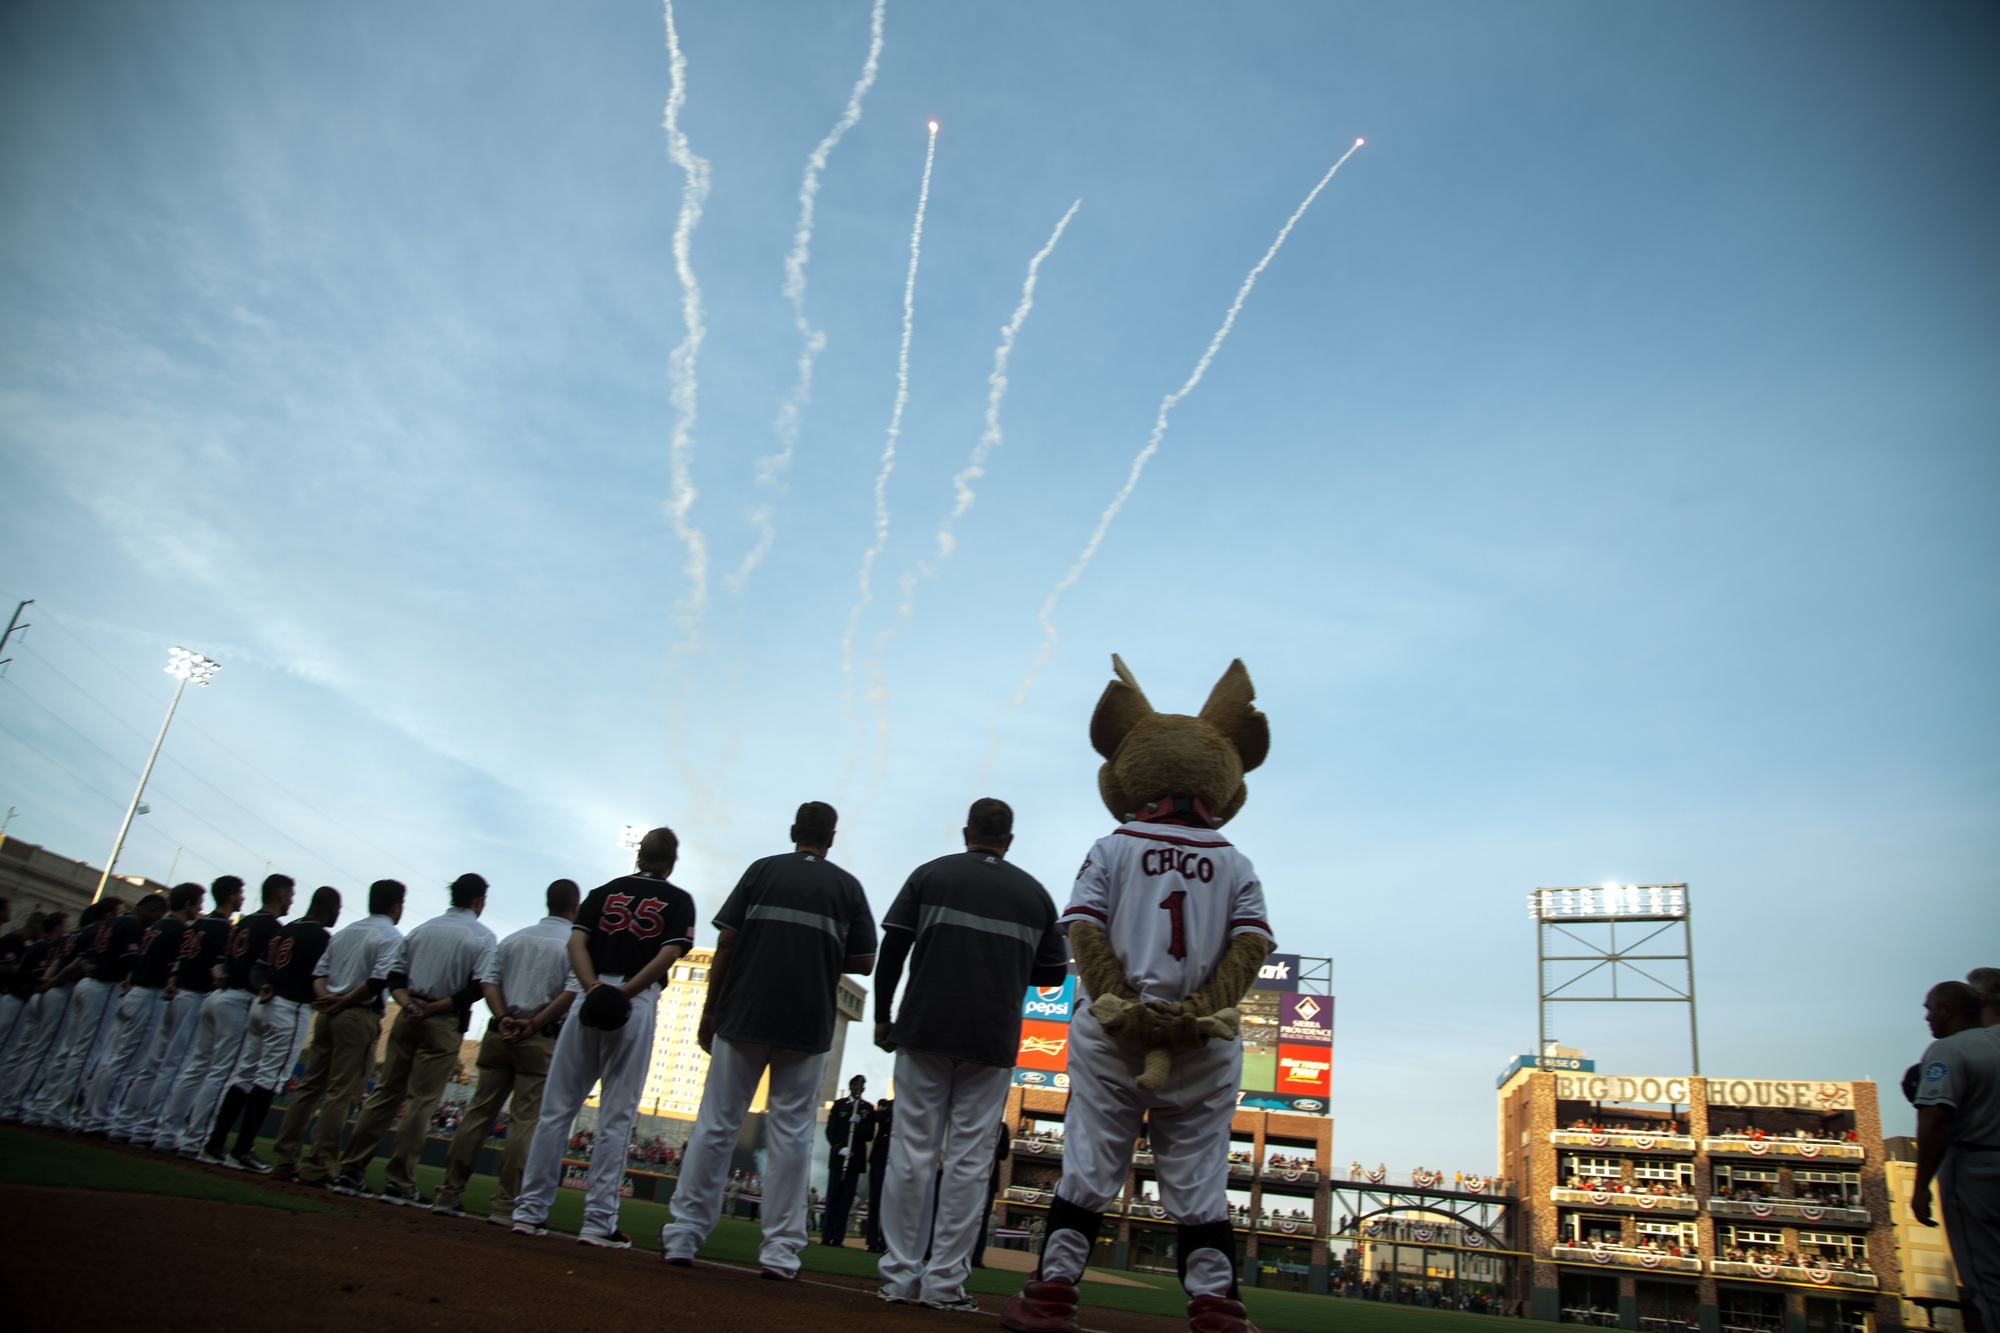 Chihuahuas Opening Night Photo Gallery - El Paso Sports Network